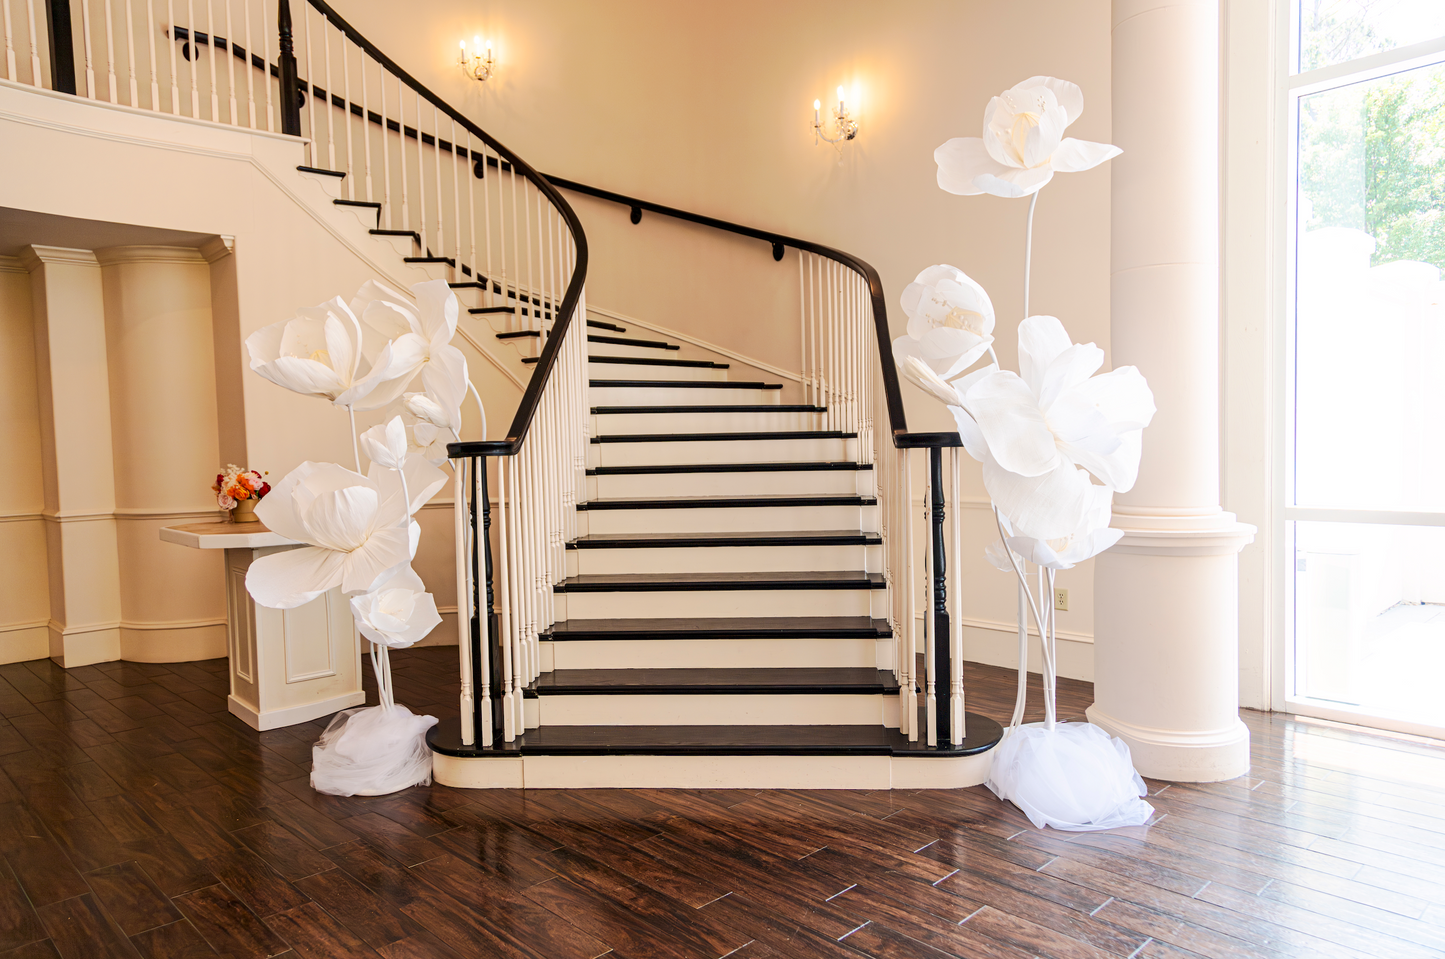 Giant White Flowers for stairs decor